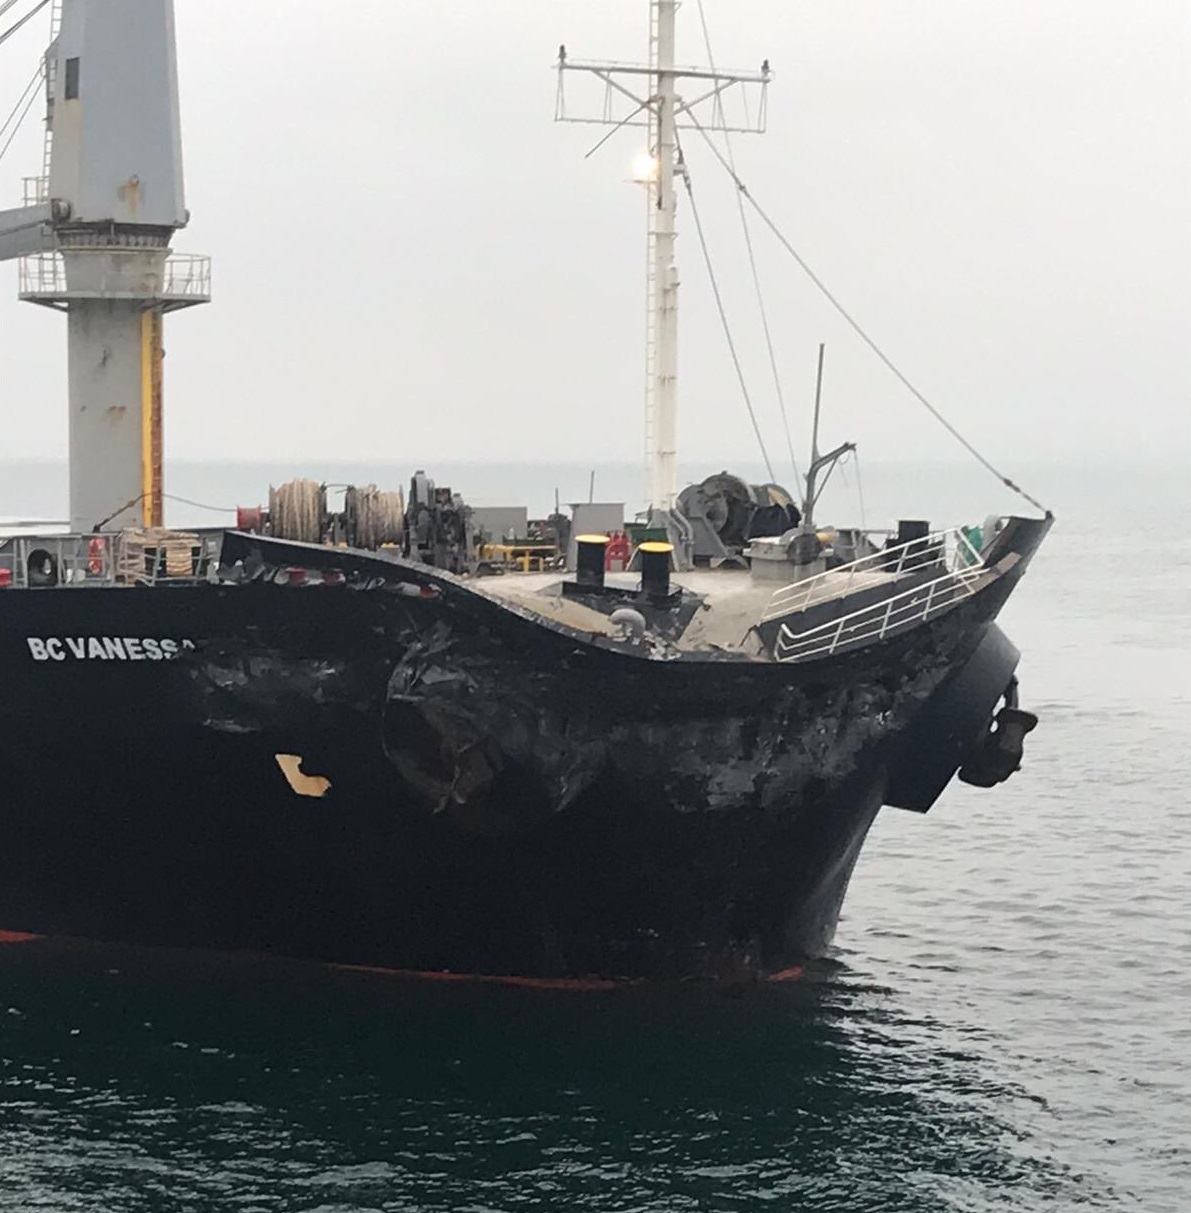 Capesize bulk carrier BENITAMOU and cargo ship BC VANESSA collided in Marmara sea, both heavily damaged